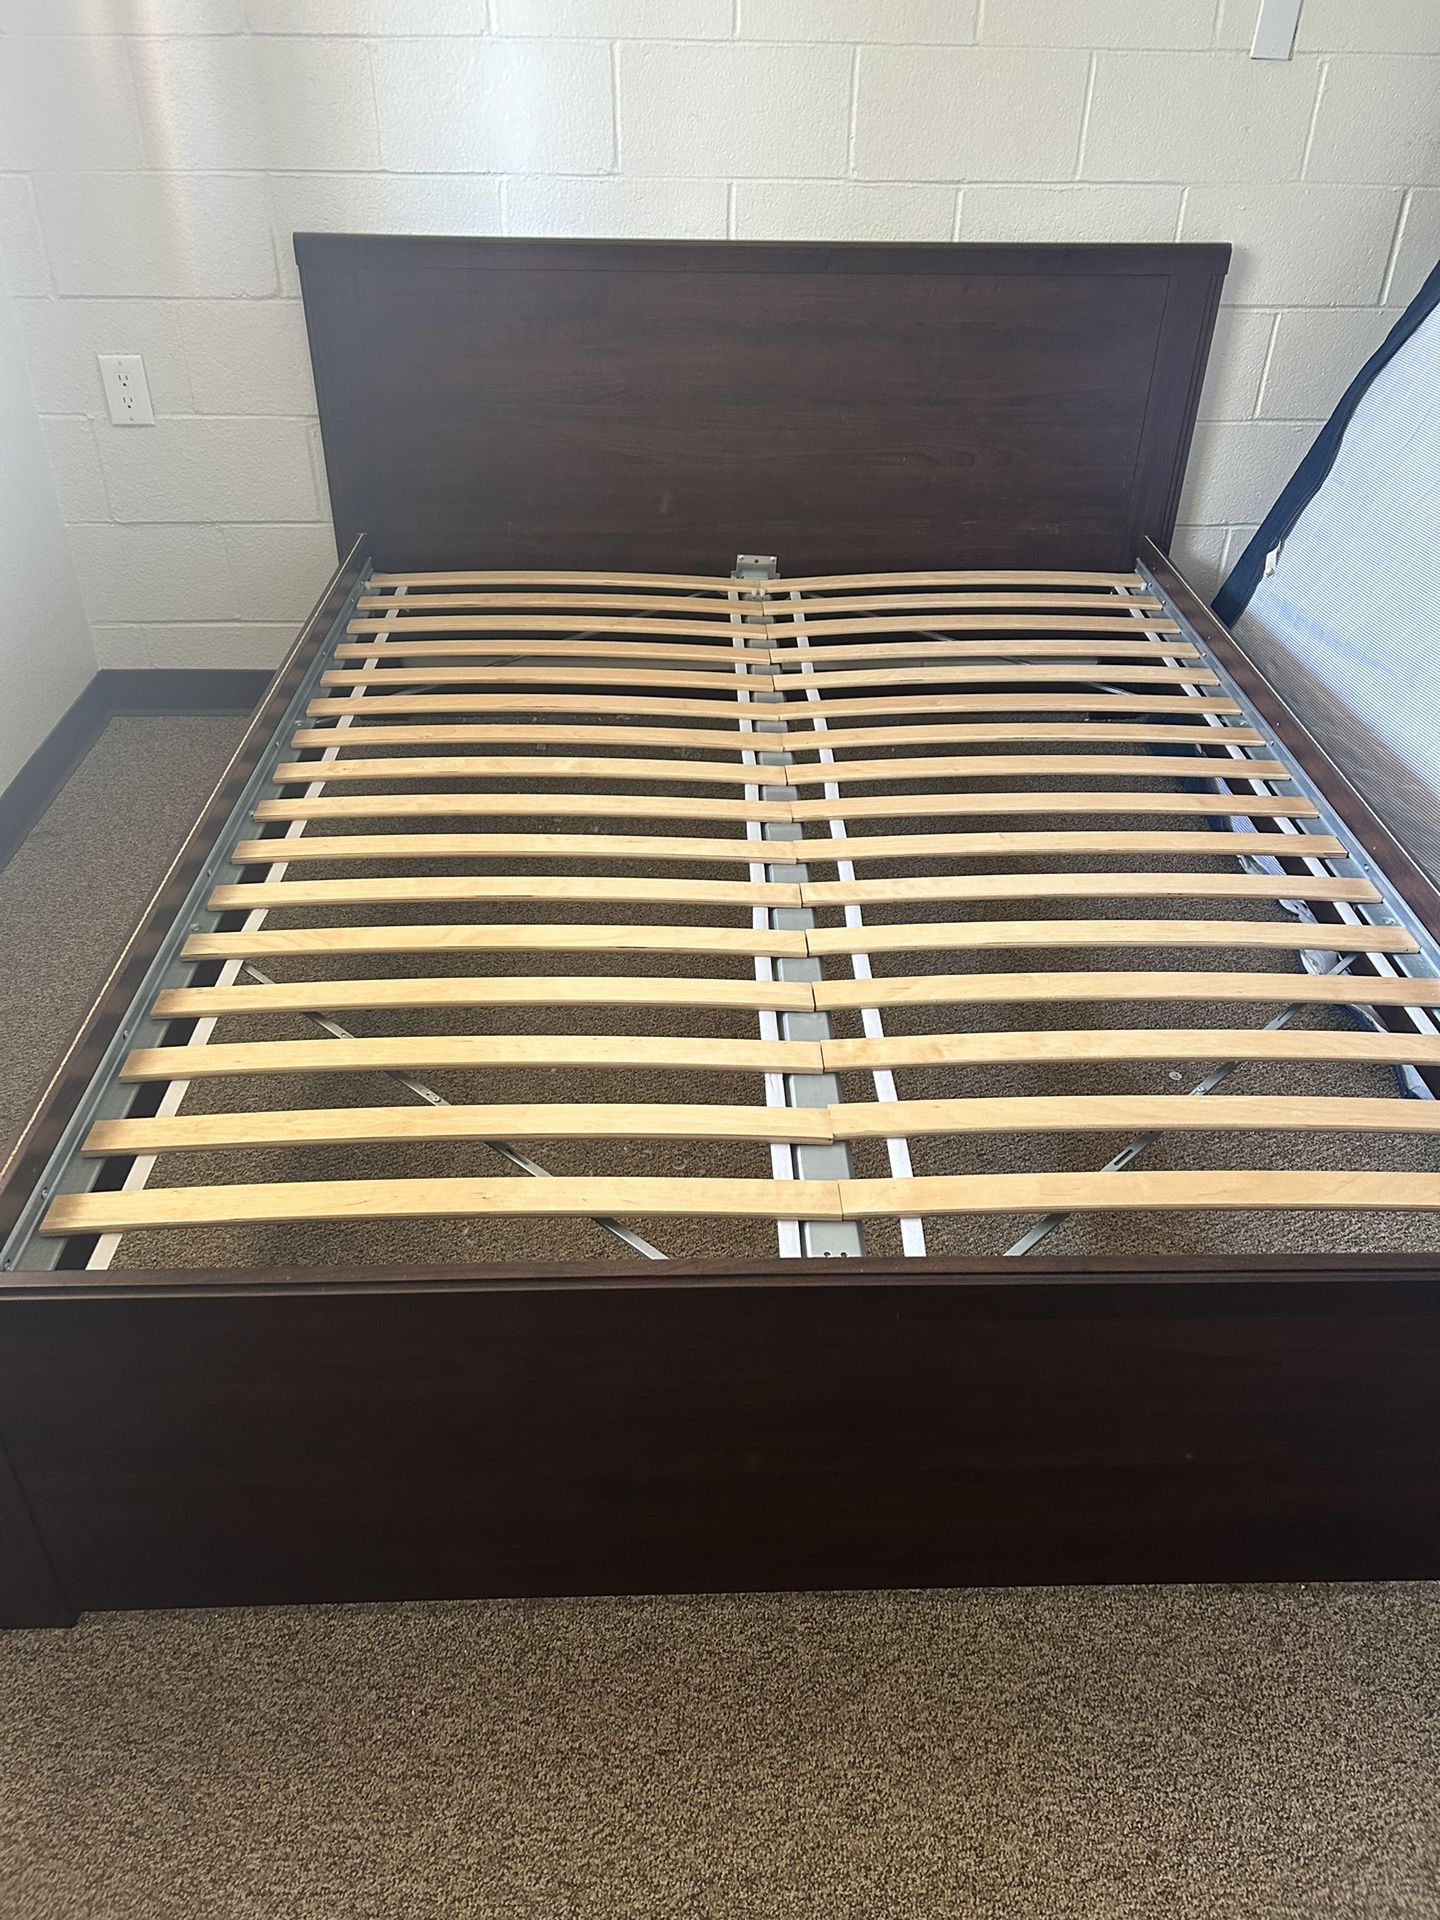 IKEA Bed Frame Queen With Headboard And Adjustable Bed Sides